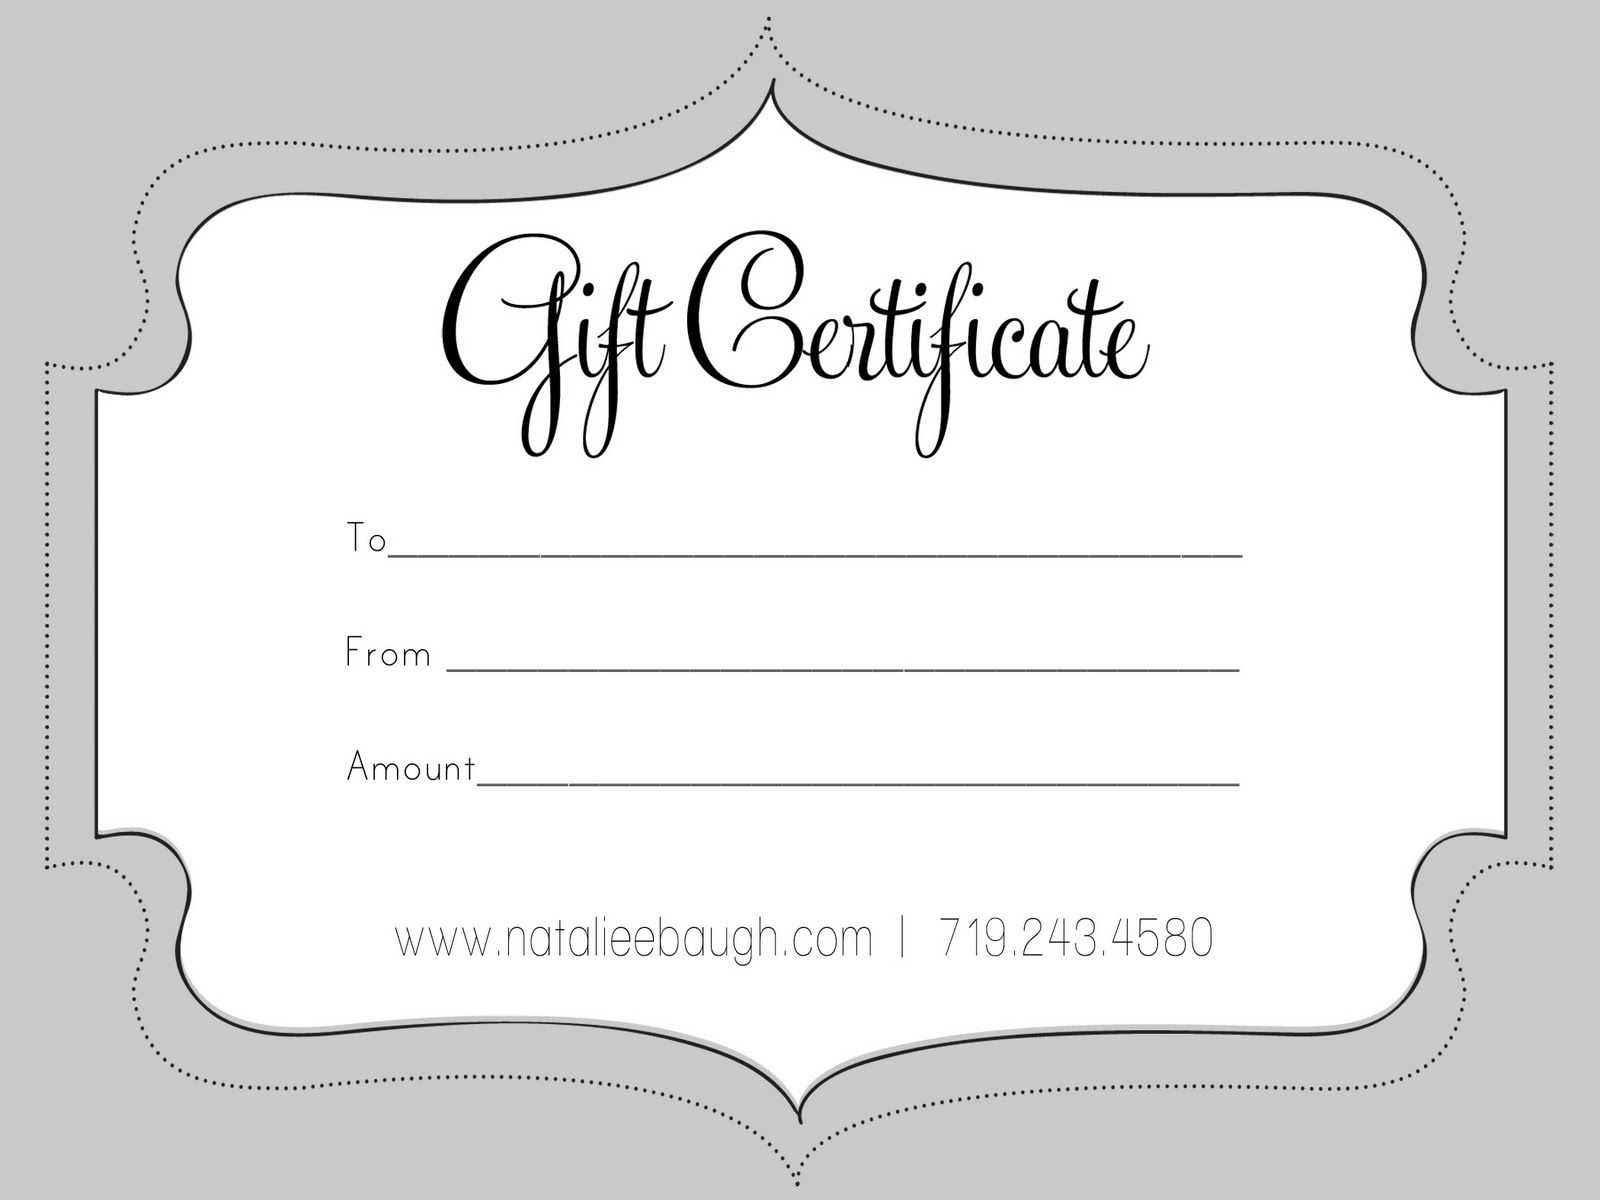 A Cute Looking Gift Certificate | S P A | Gift Certificate Throughout Homemade Christmas Gift Certificates Templates